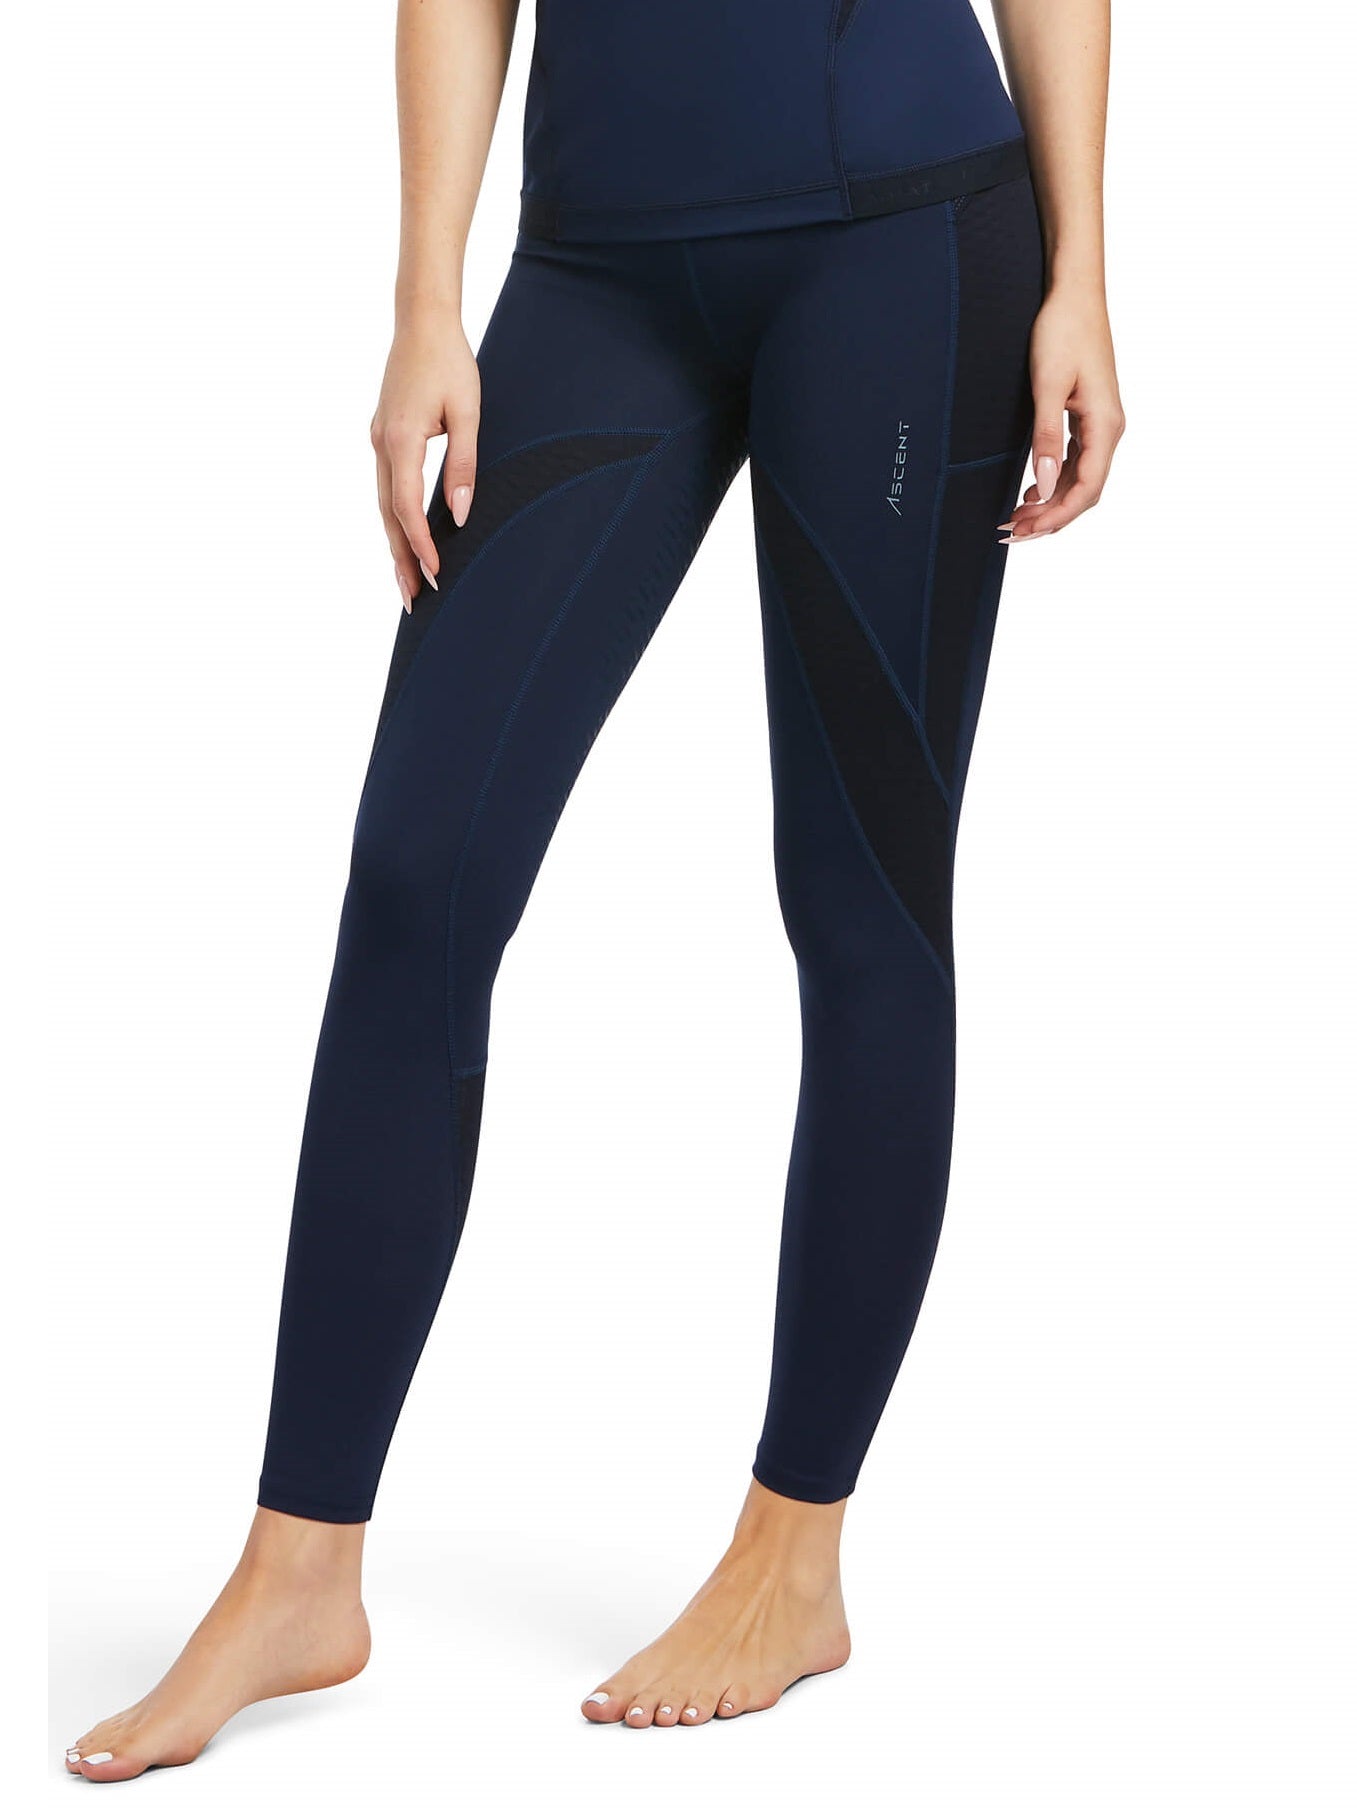 60% OFF ARIAT Ascent Riding Tights - Womens - Navy - Size: XS & LARGE